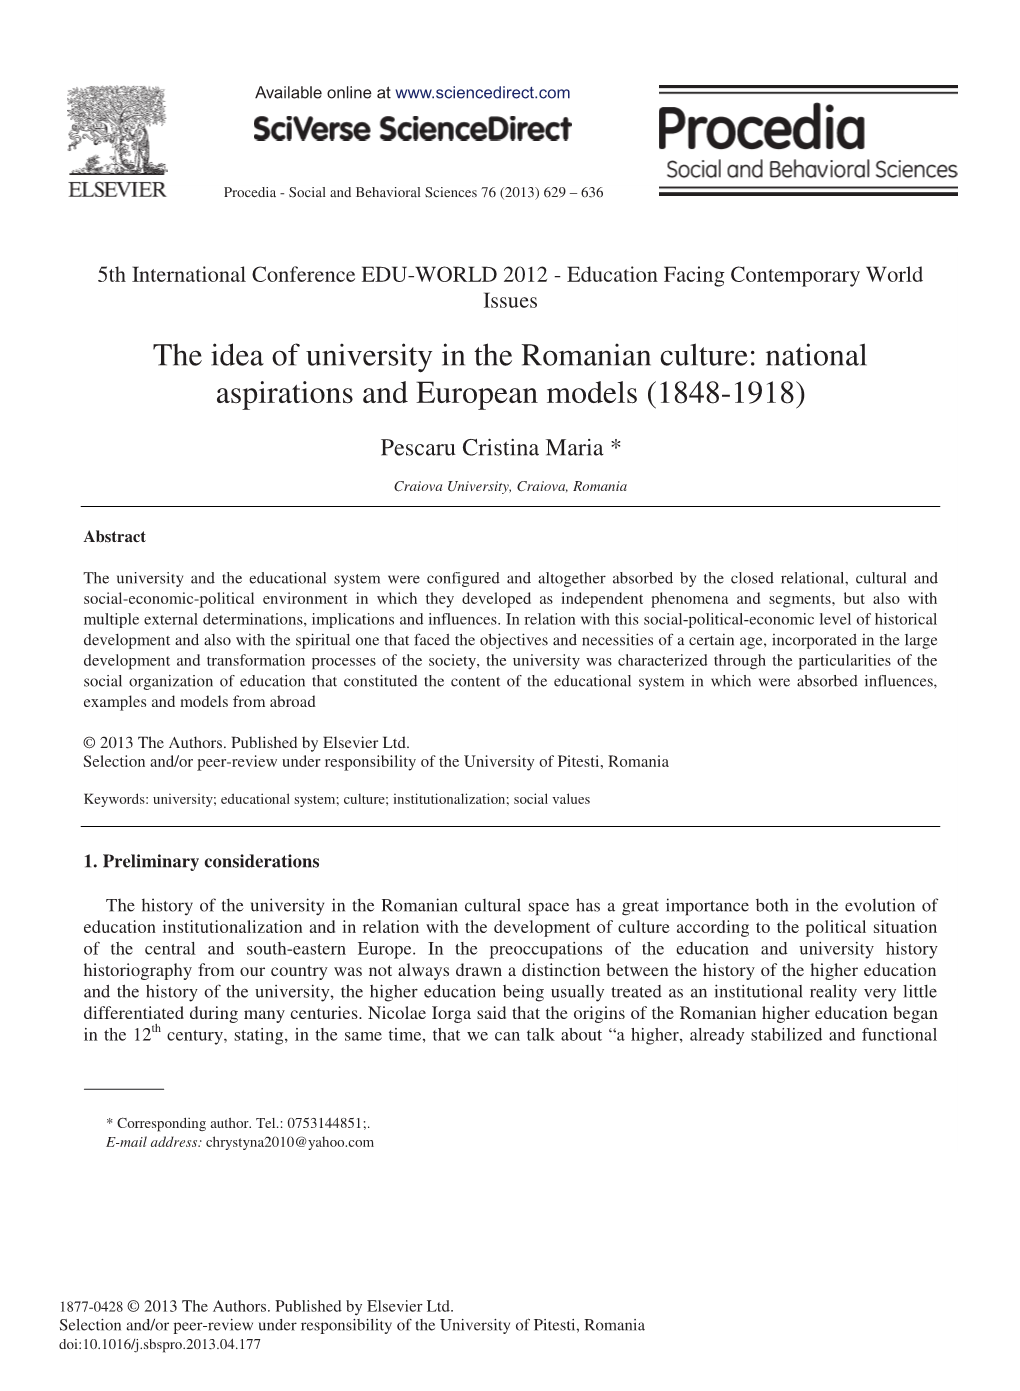 The Idea of University in the Romanian Culture: National Aspirations and European Models (1848-1918)